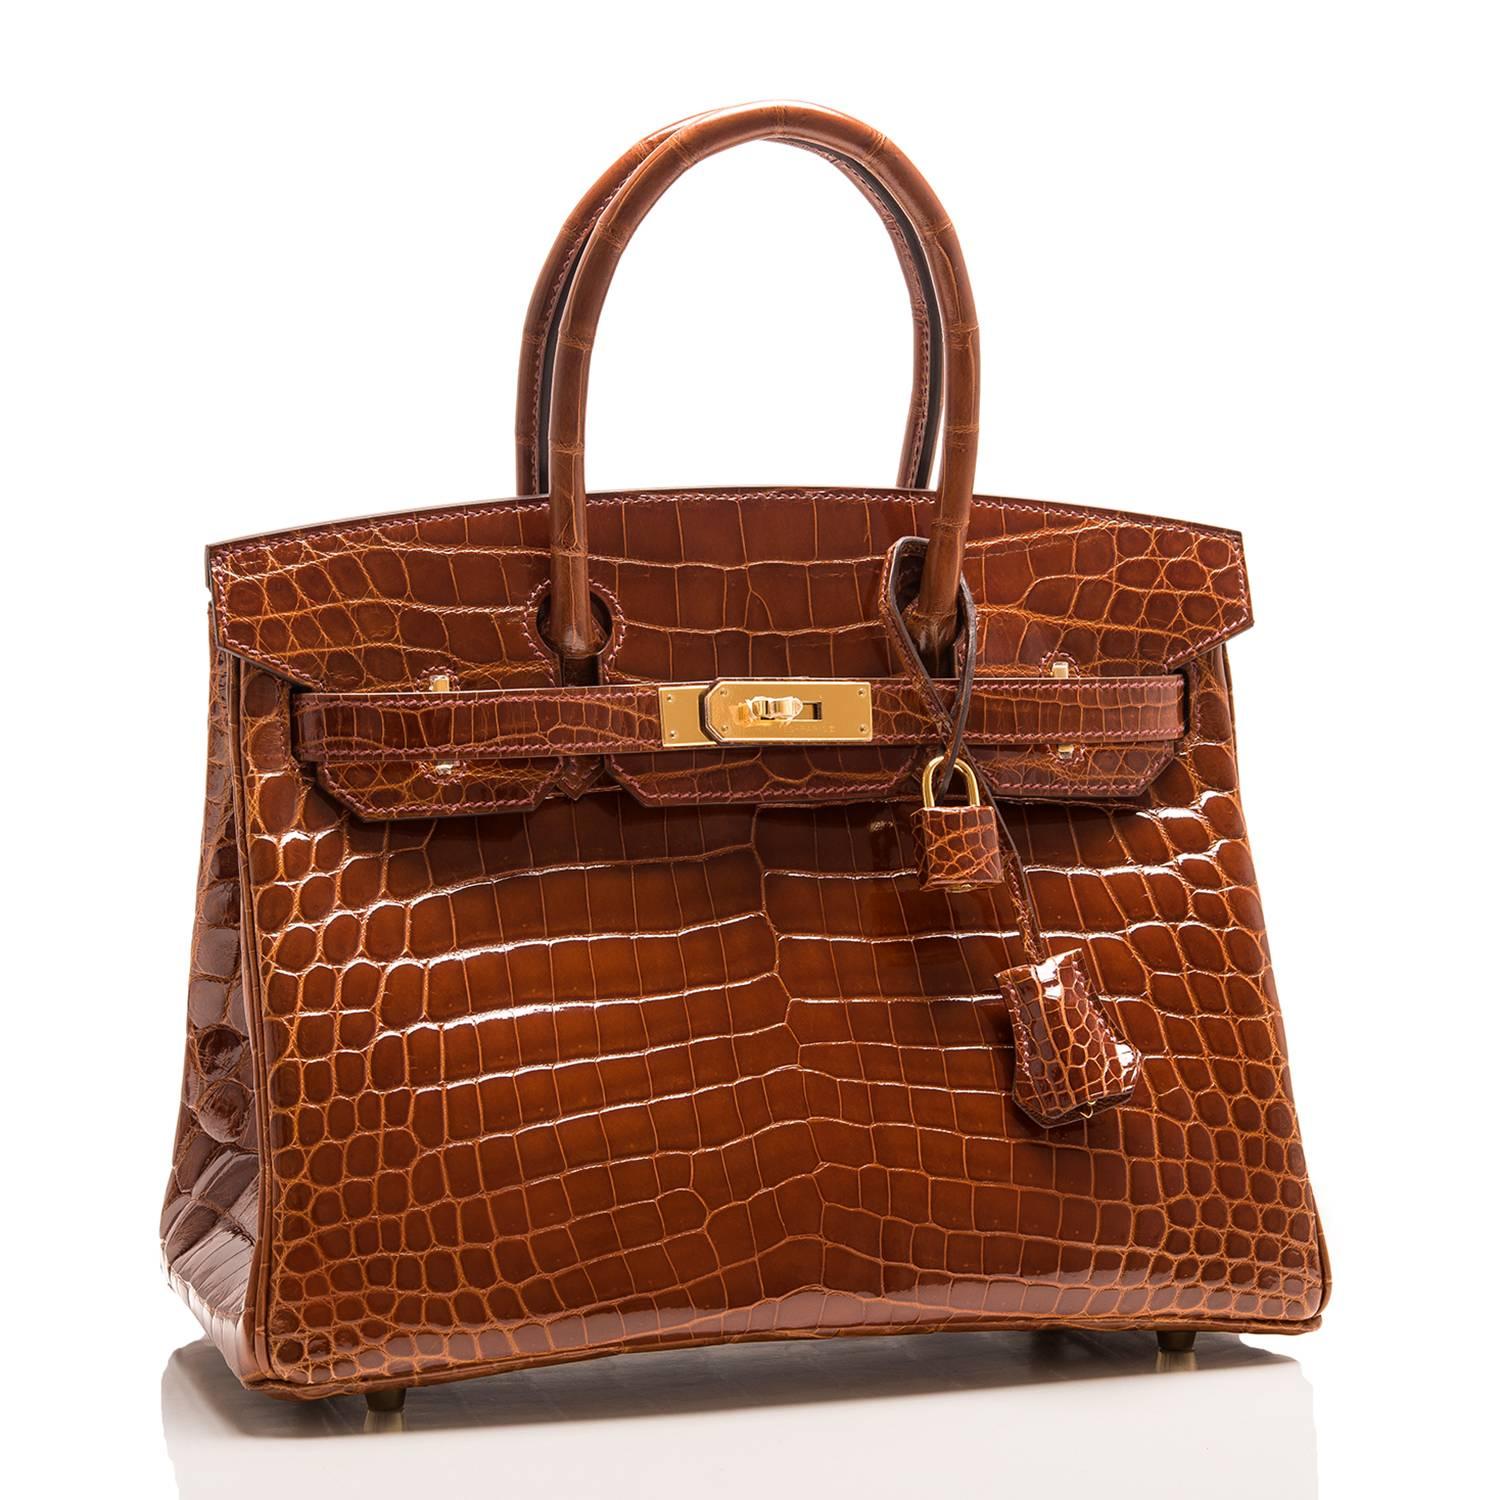 Hermes Miel Birkin 30cm of shiny niloticus crocodile leather with gold hardware.

This Birkin has tonal stitching, a front toggle closure, a clochette with lock and two keys, and double rolled handles.

The interior is lined with Miel chevre and